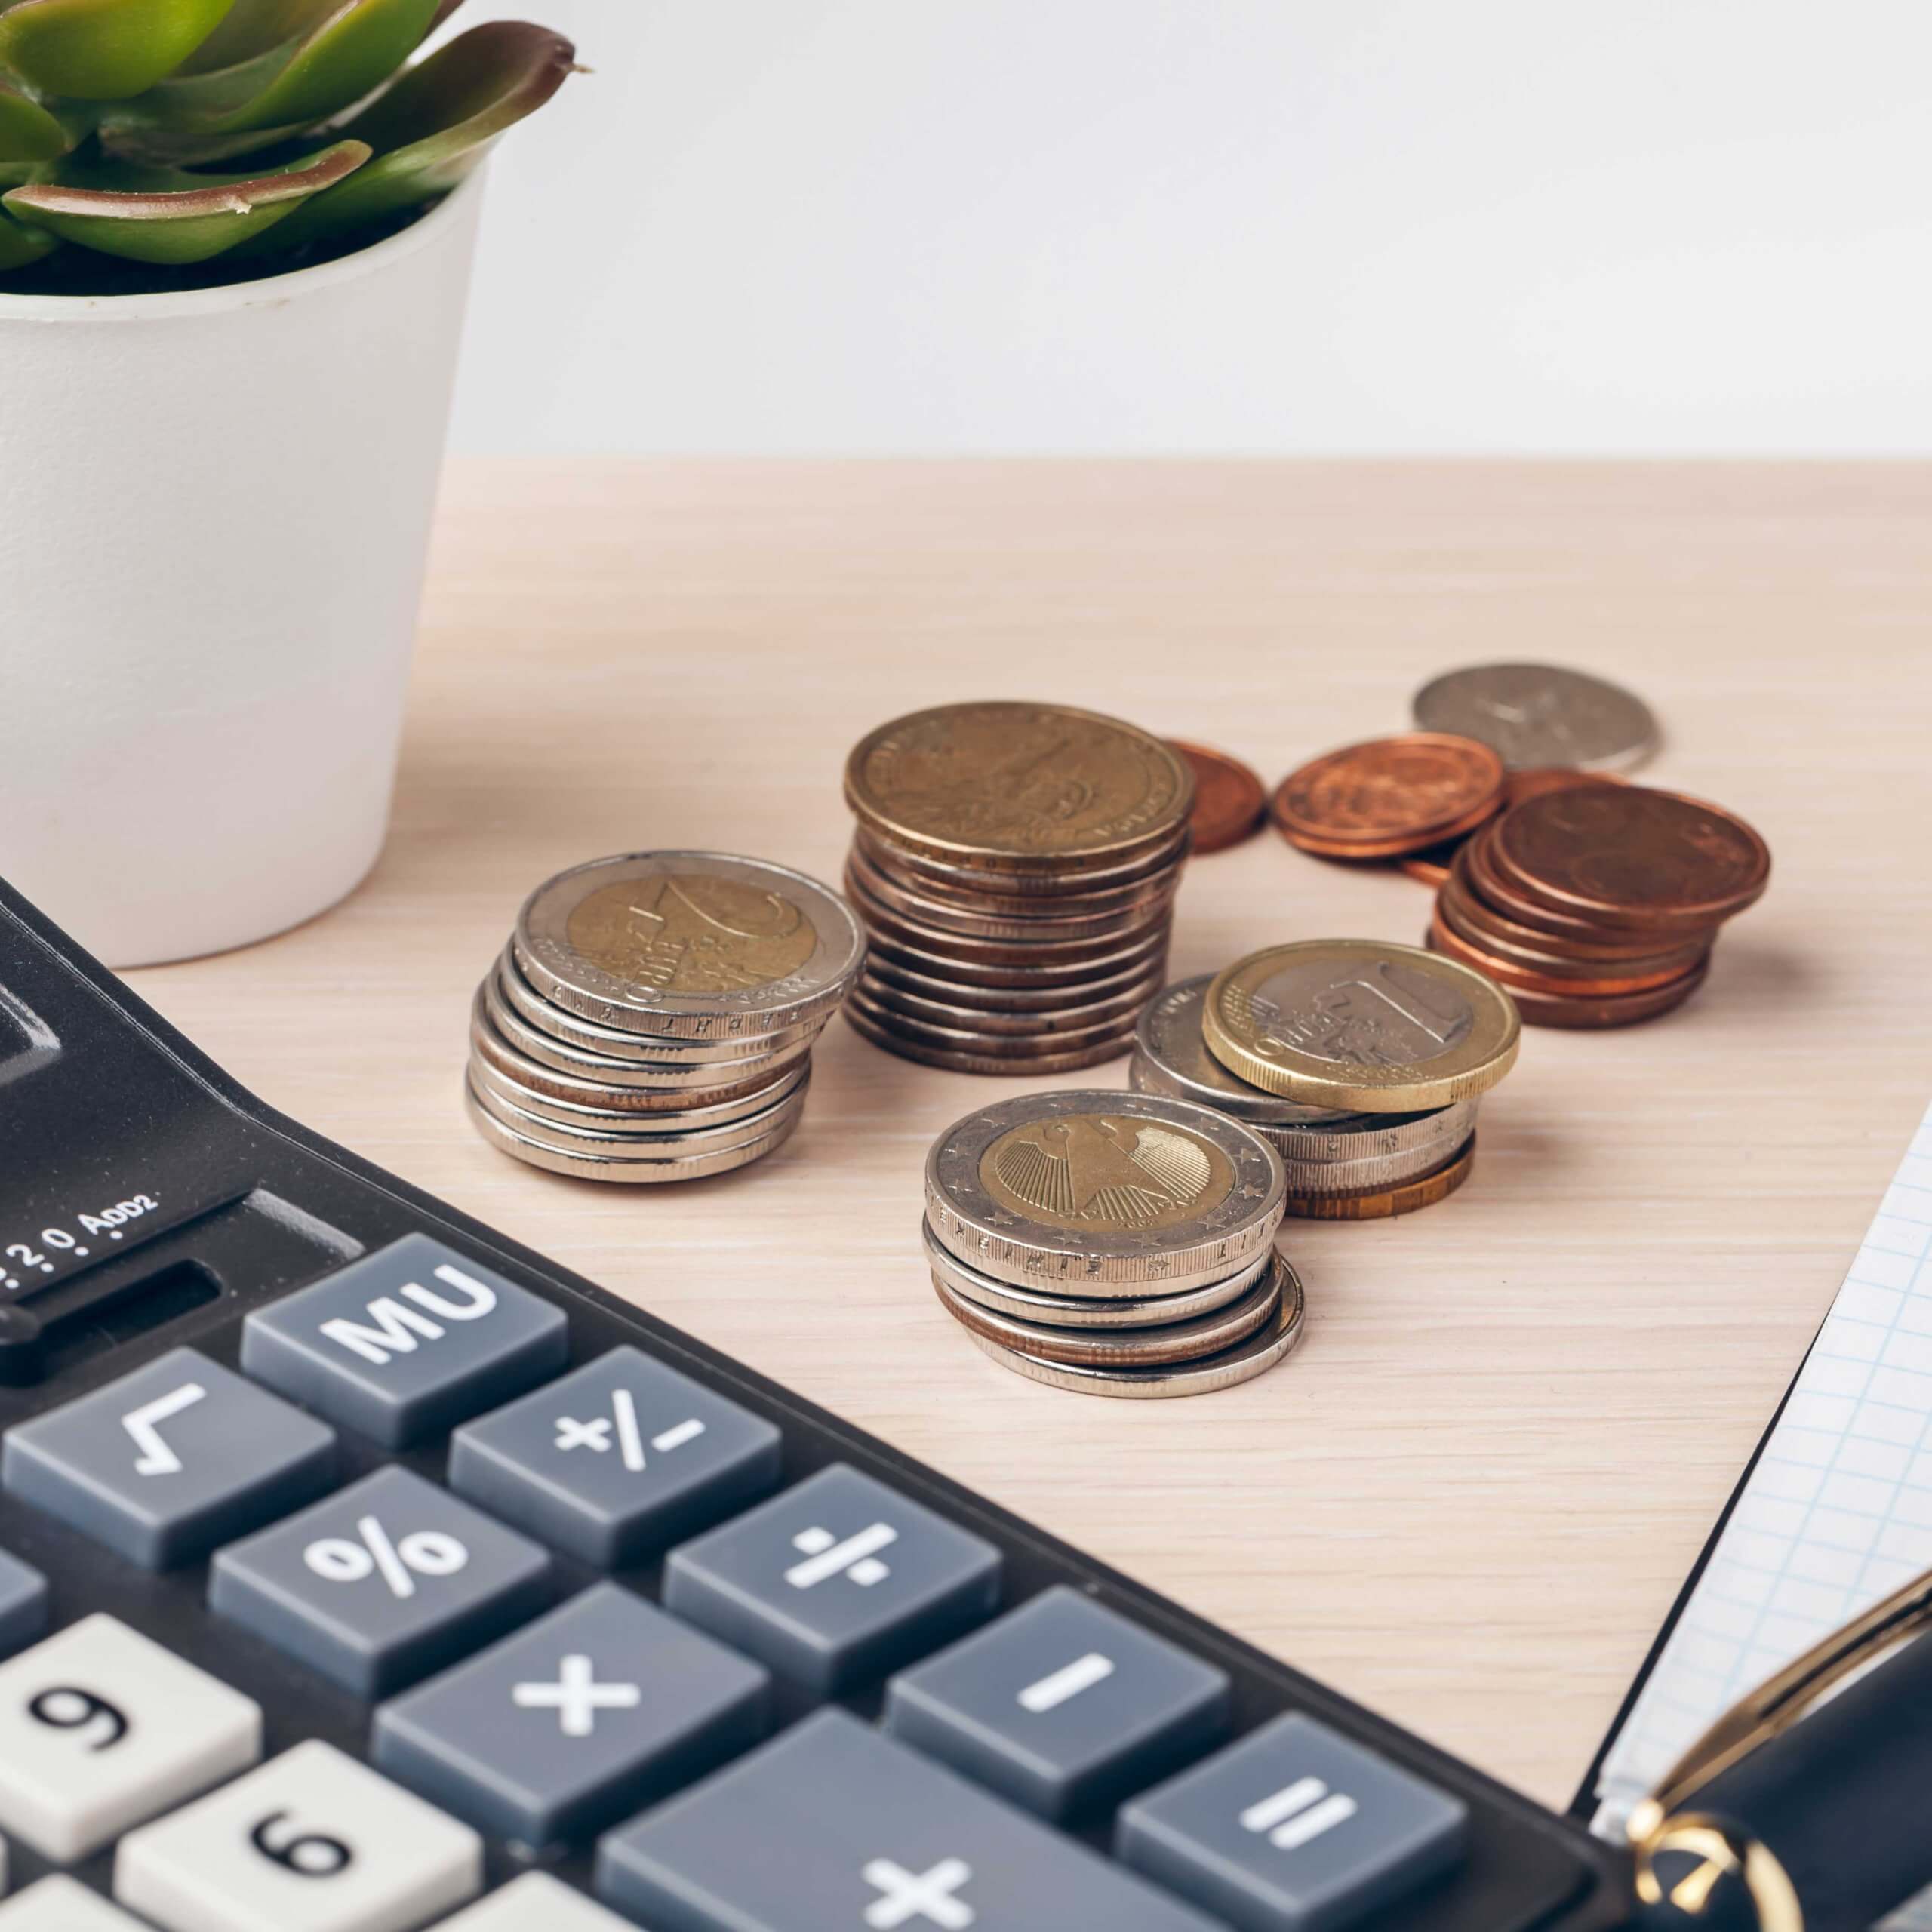 An image of a calculator, coins and p;art of a plant, all on a desk. A visual metaphor for the topic of this post, Financial promotion exemptions: Government U-turn.